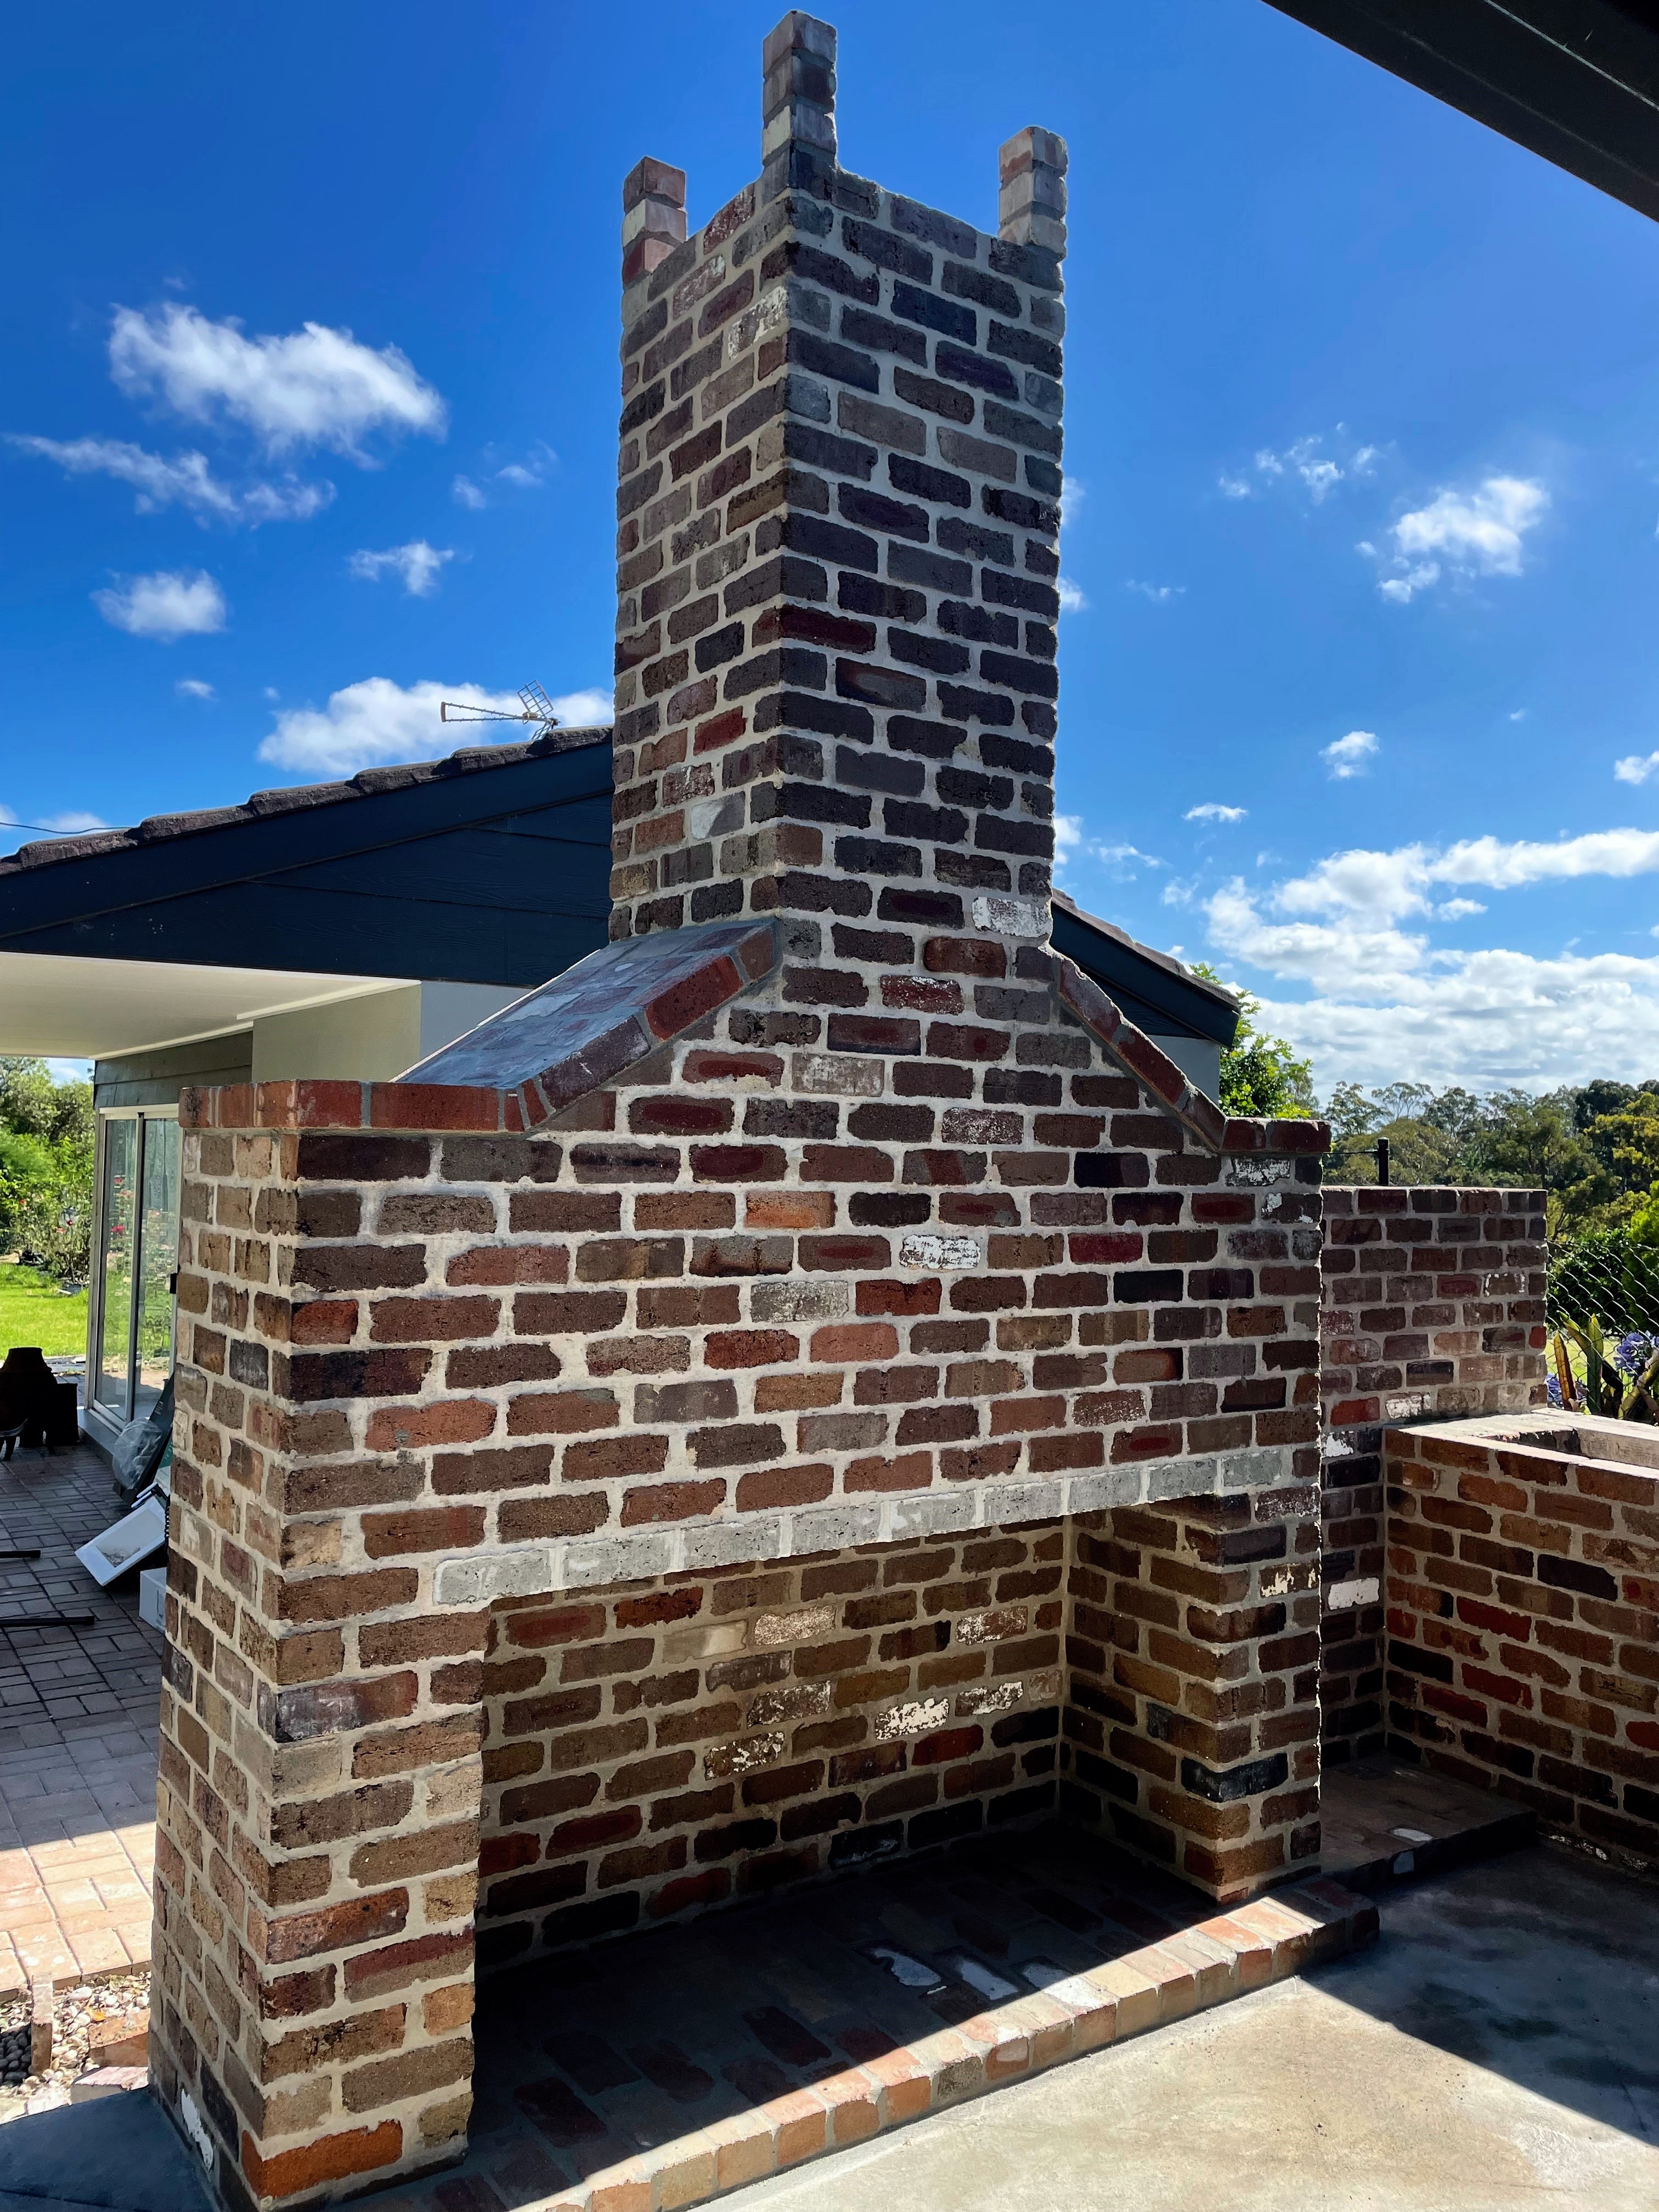 A stonework garden chimney with cooking area and fire pit